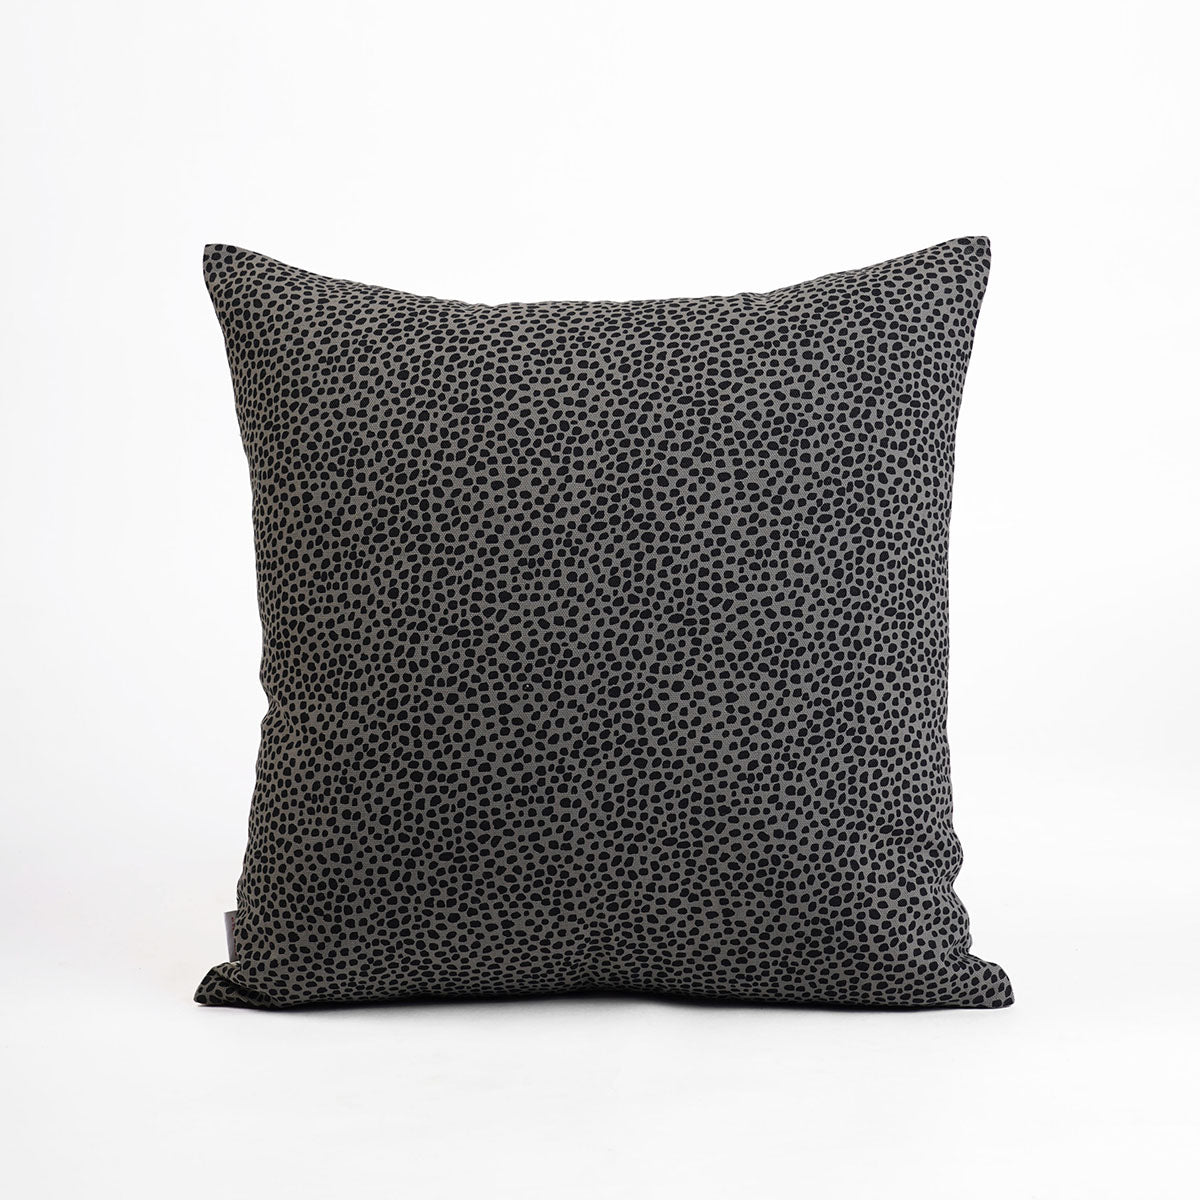 MODERN RETRO - Grey reversible cotton throw pillow cover, leaf print, sizes available.